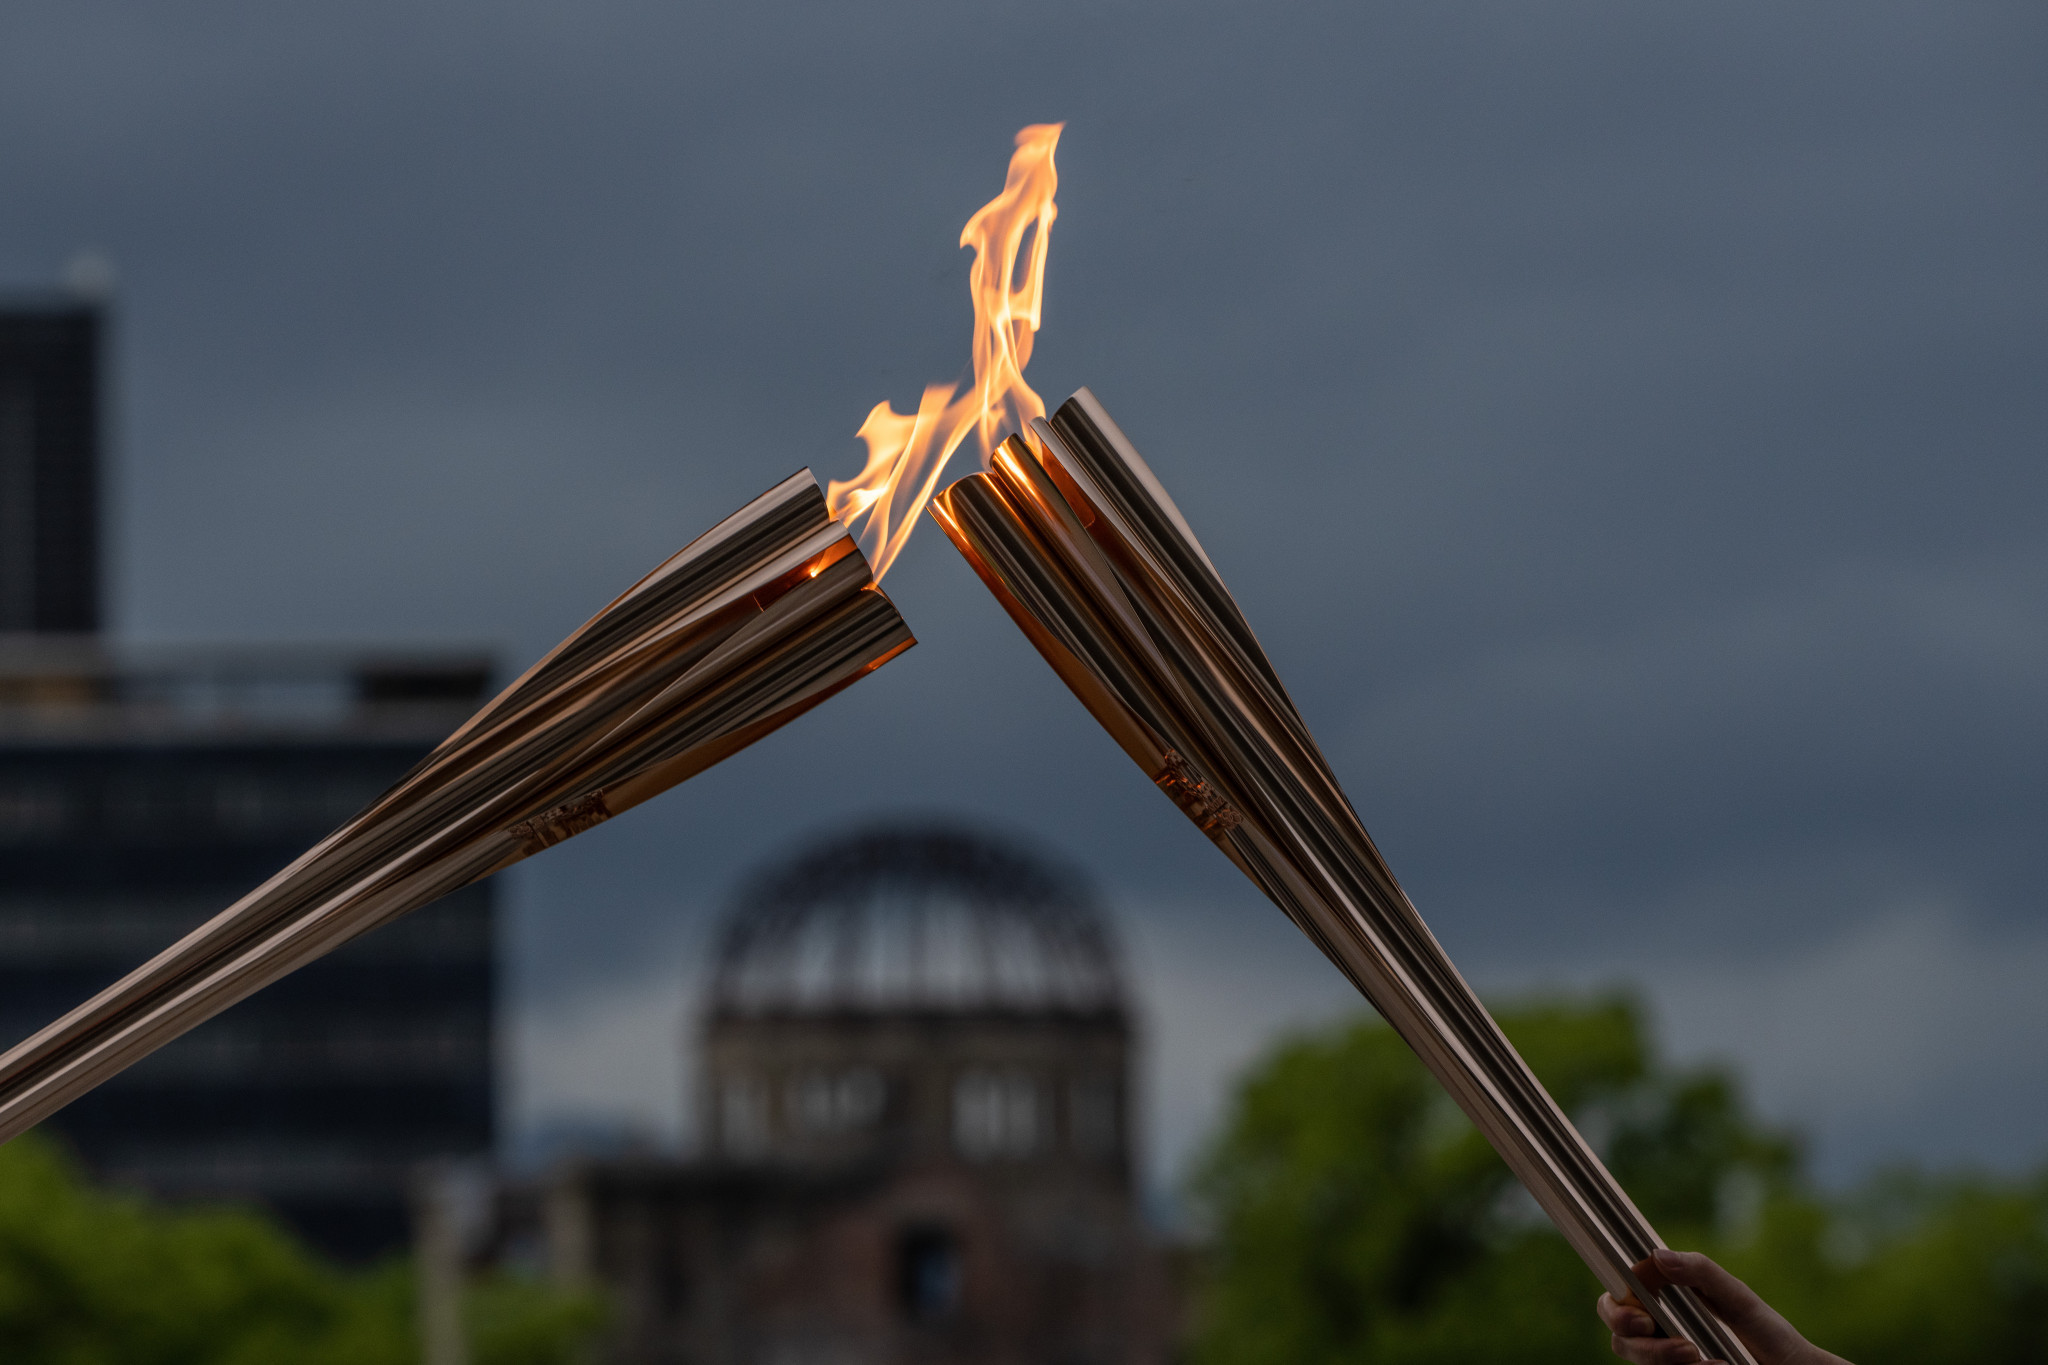 Bach claims Olympic Torch "call for peace" as it visits Hiroshima 